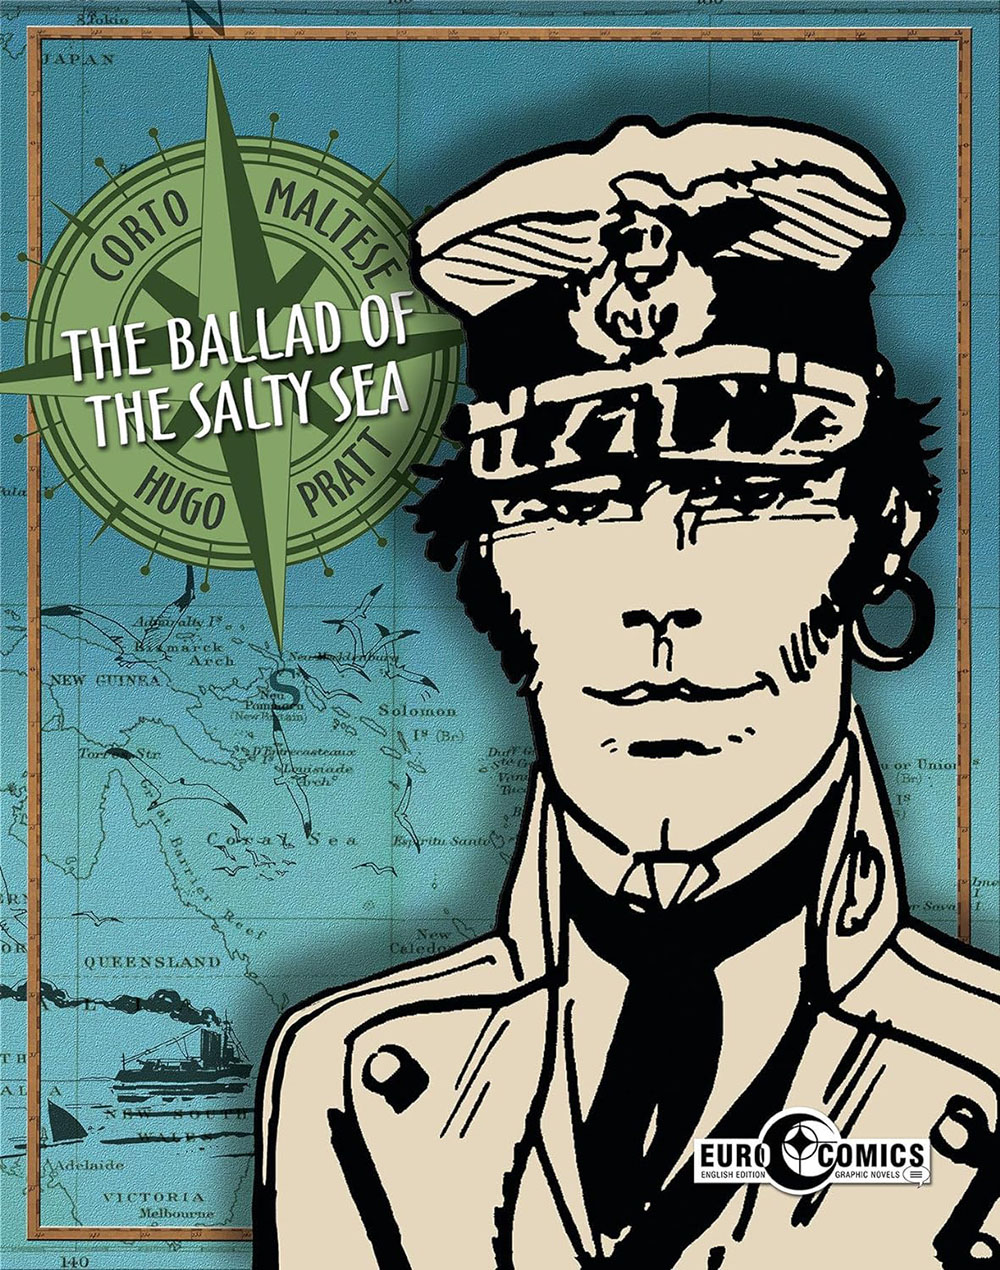 Corto Maltese - The Ballad Of The Salty Sea at The Book Palace